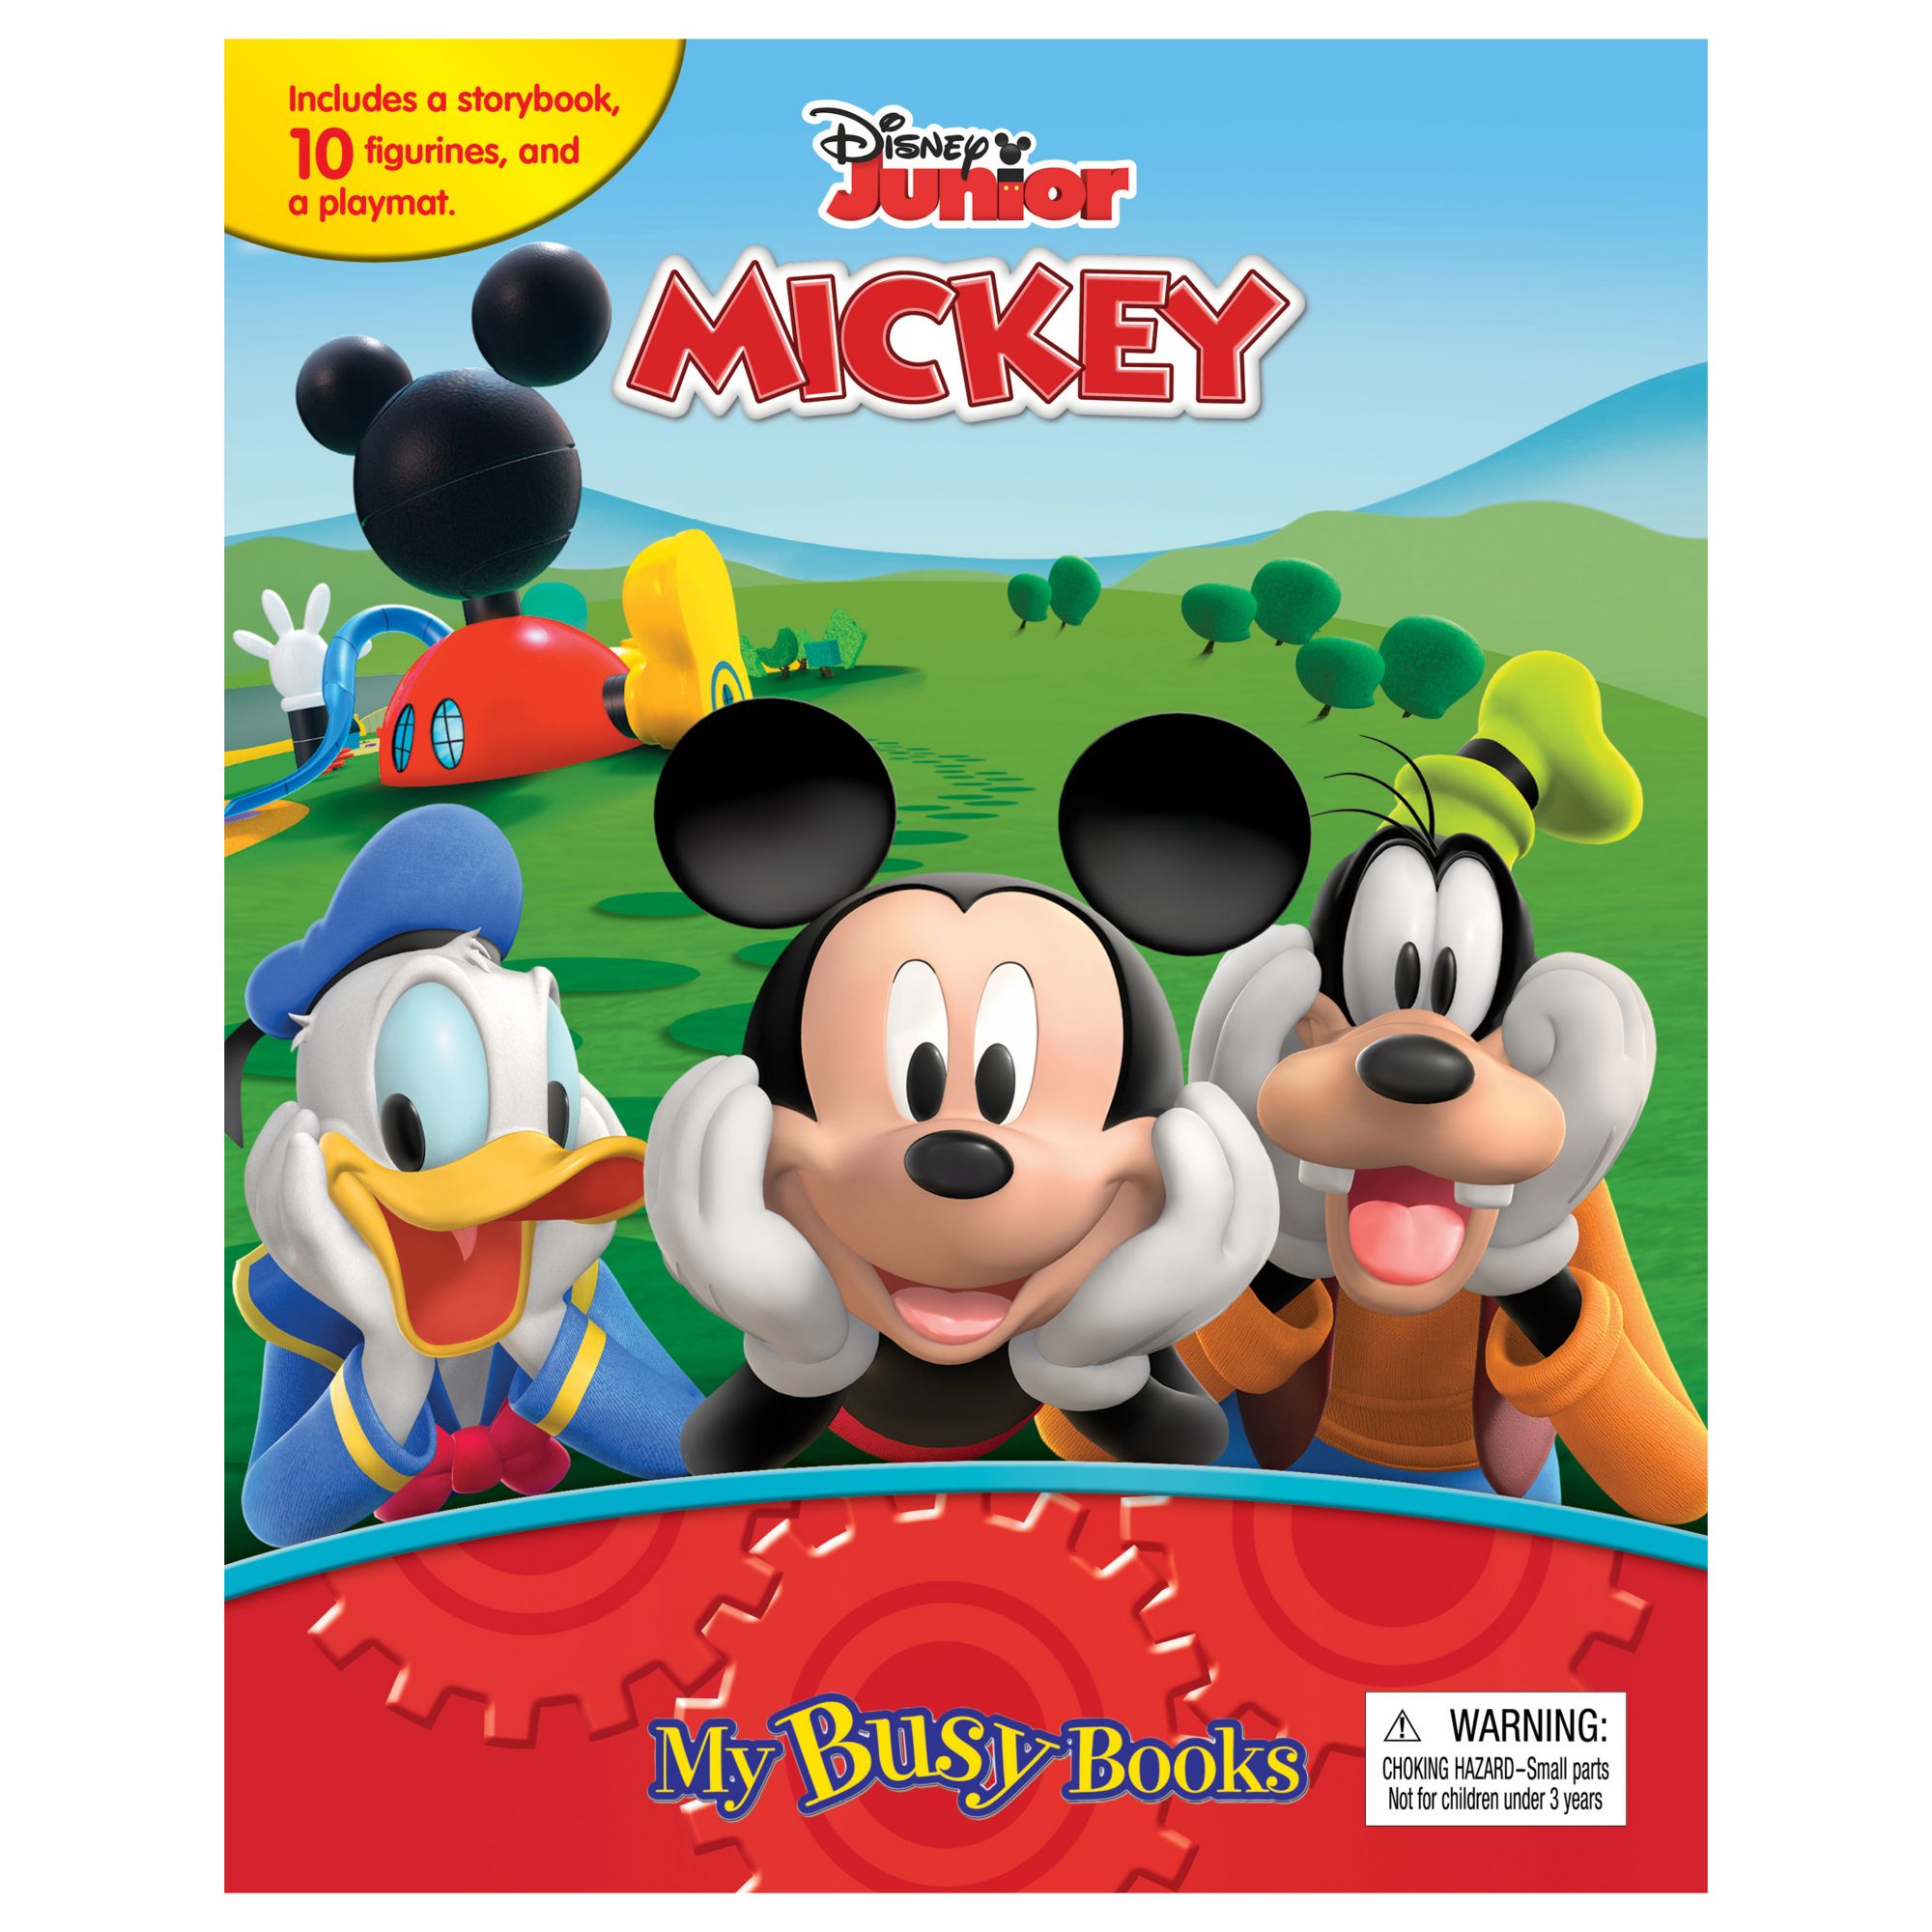 Enter Mickey Mouse's Funhouse with New Toys Based on the Disney